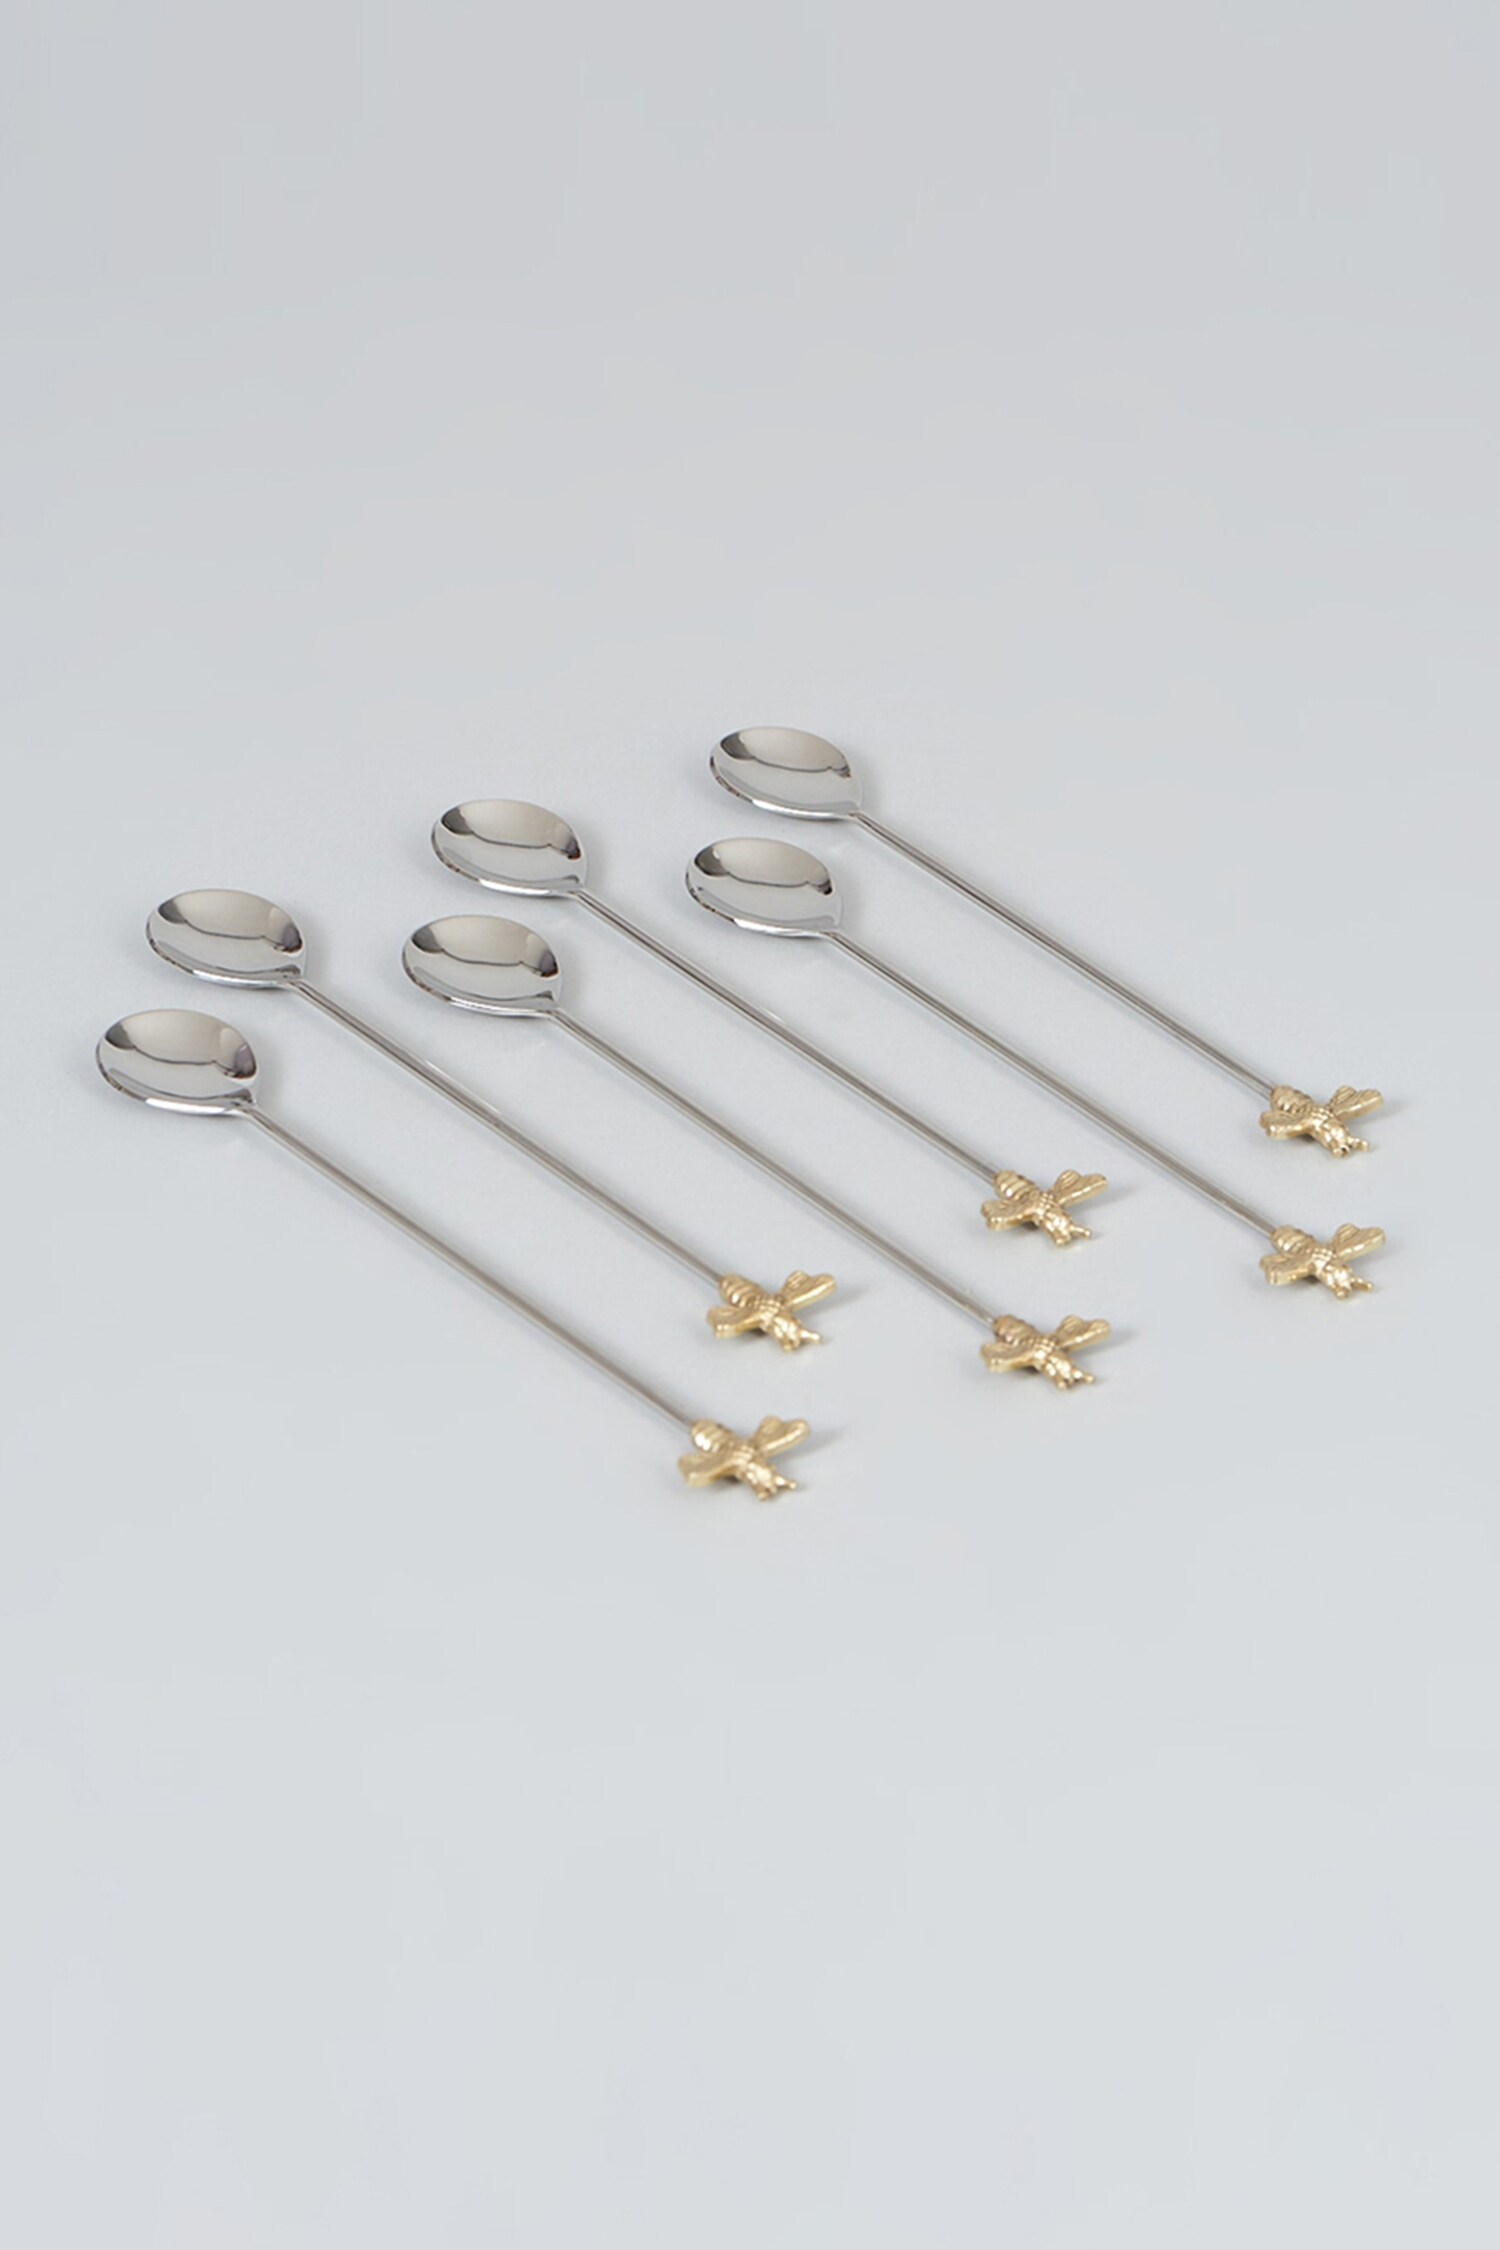 Assemblage Buzzy Bee Cocktail Stirrer Spoons - Set Of 6